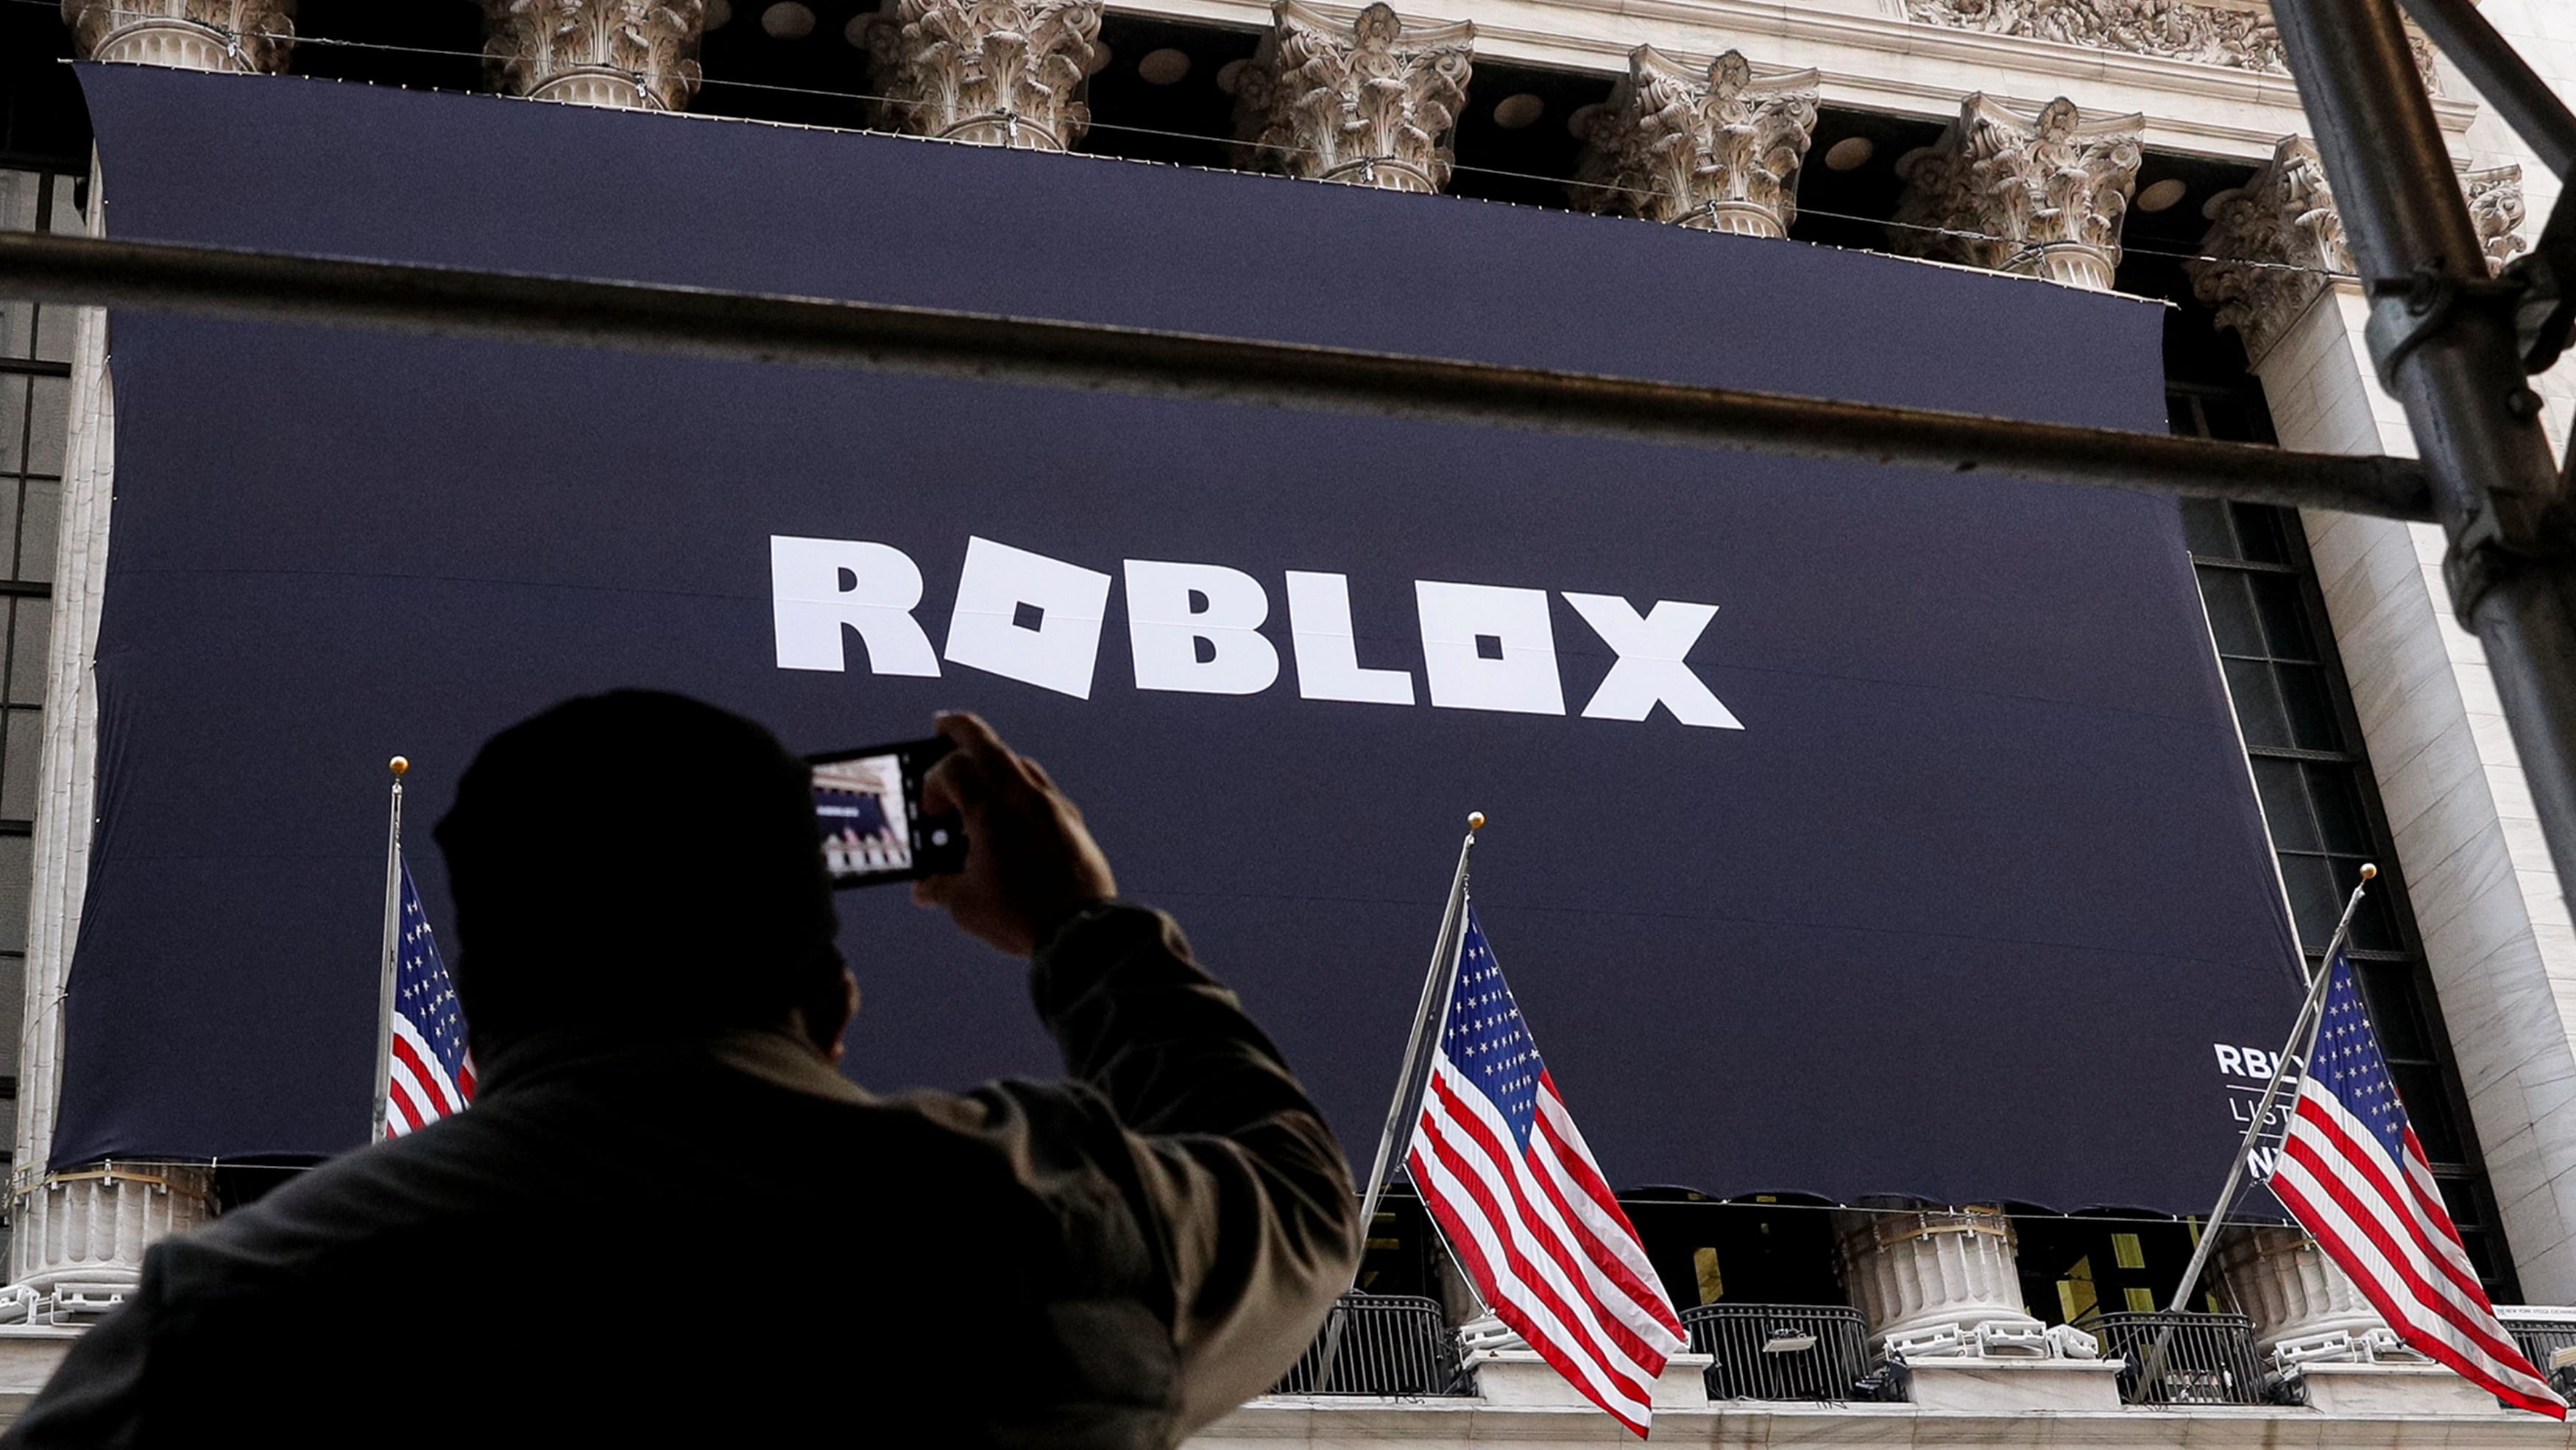 Roblox Rblx To Report Q1 Earnings What S In The Cards - south african police service roblox